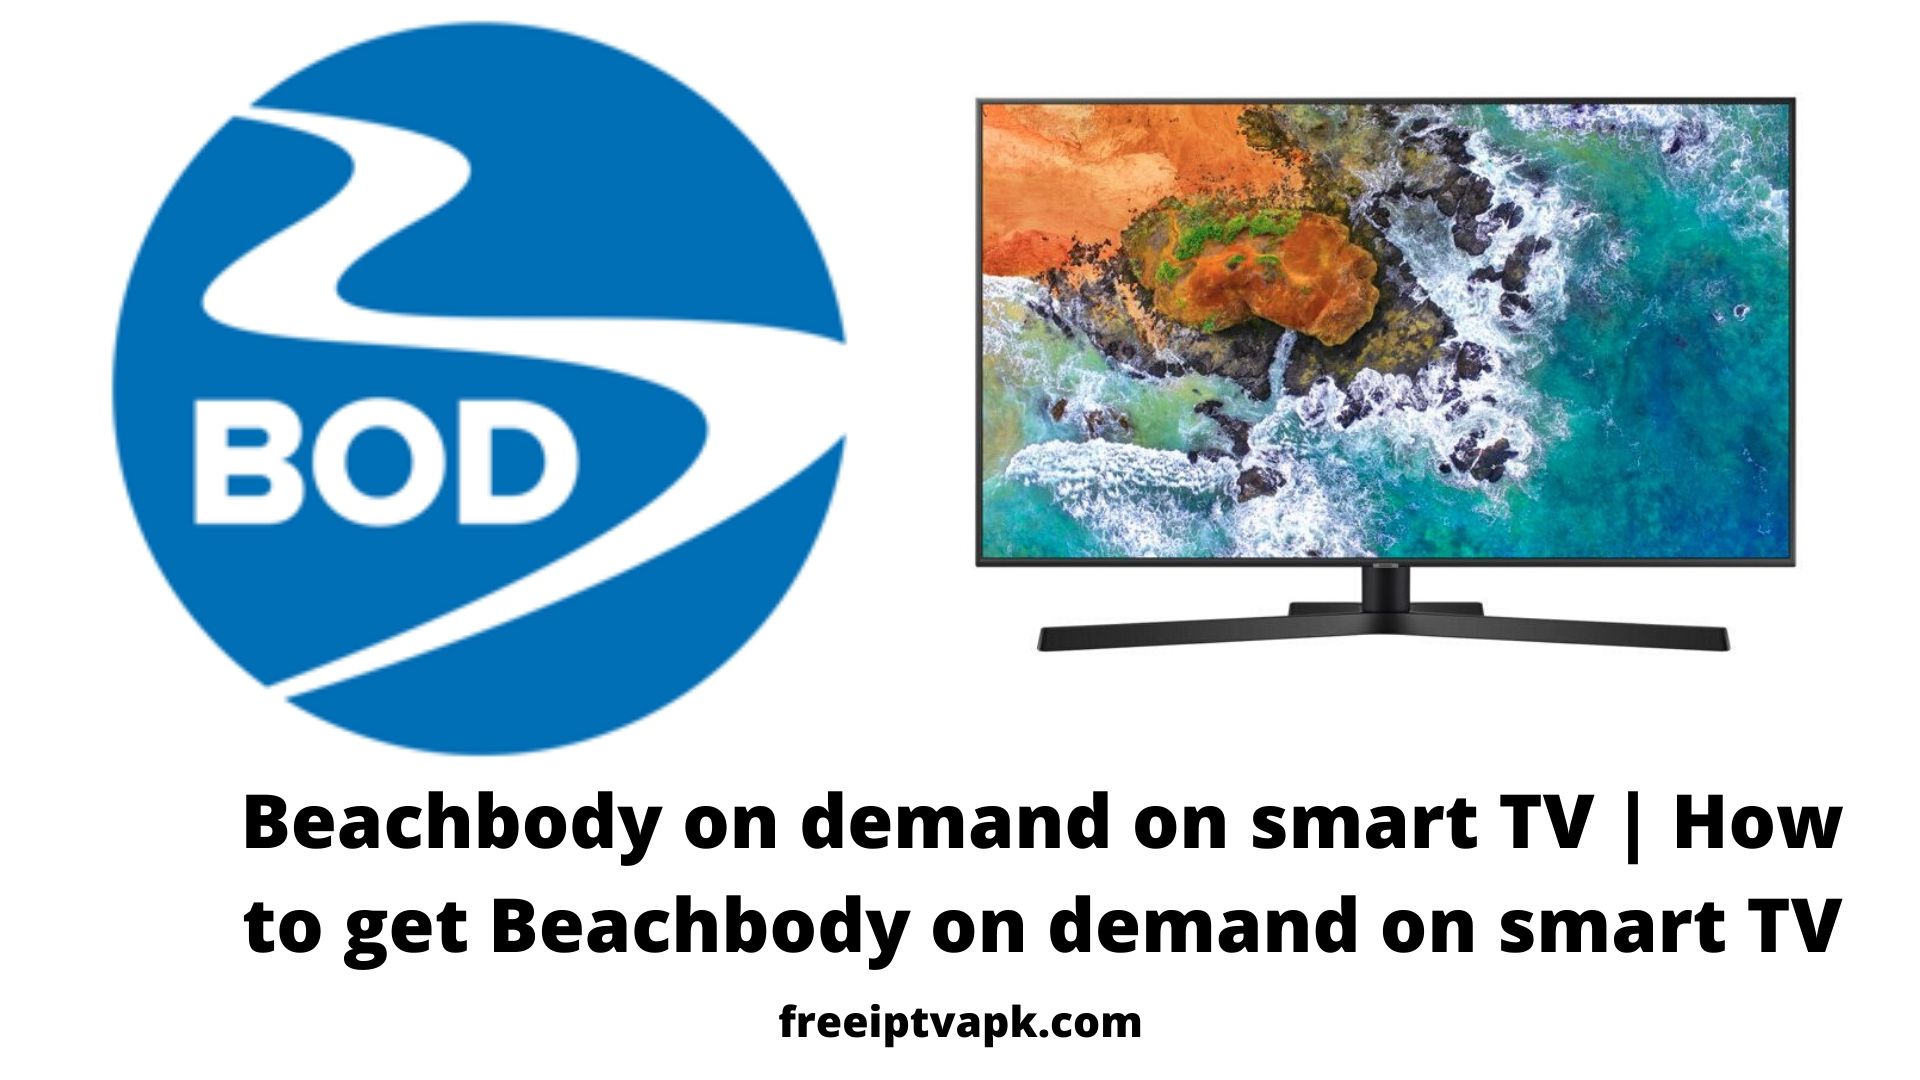 How to get Beachbody on demand on a smart TV? [2020]